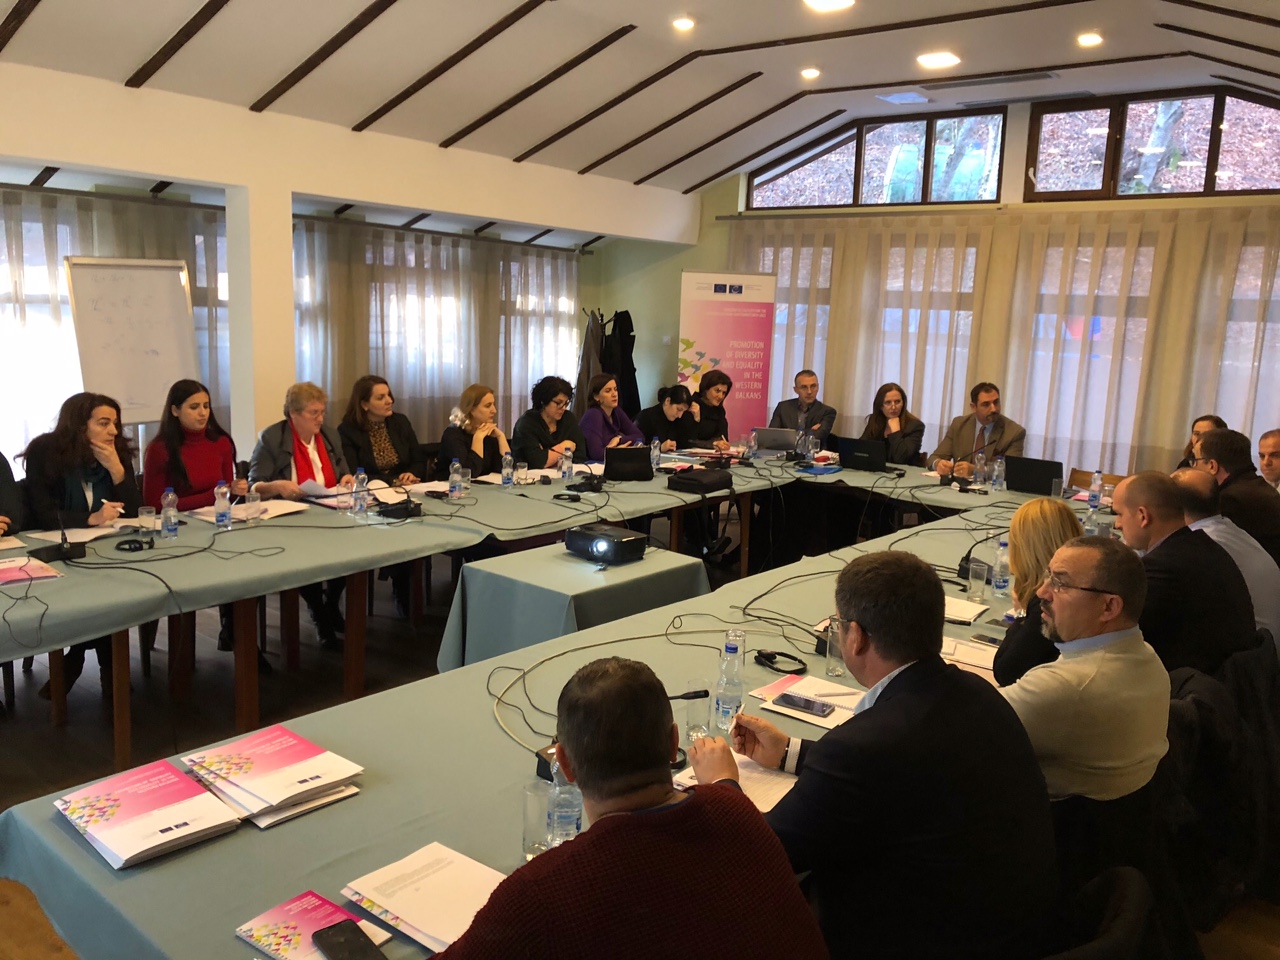 Assisting Kosovo* authorities in developing anti-discrimination policies